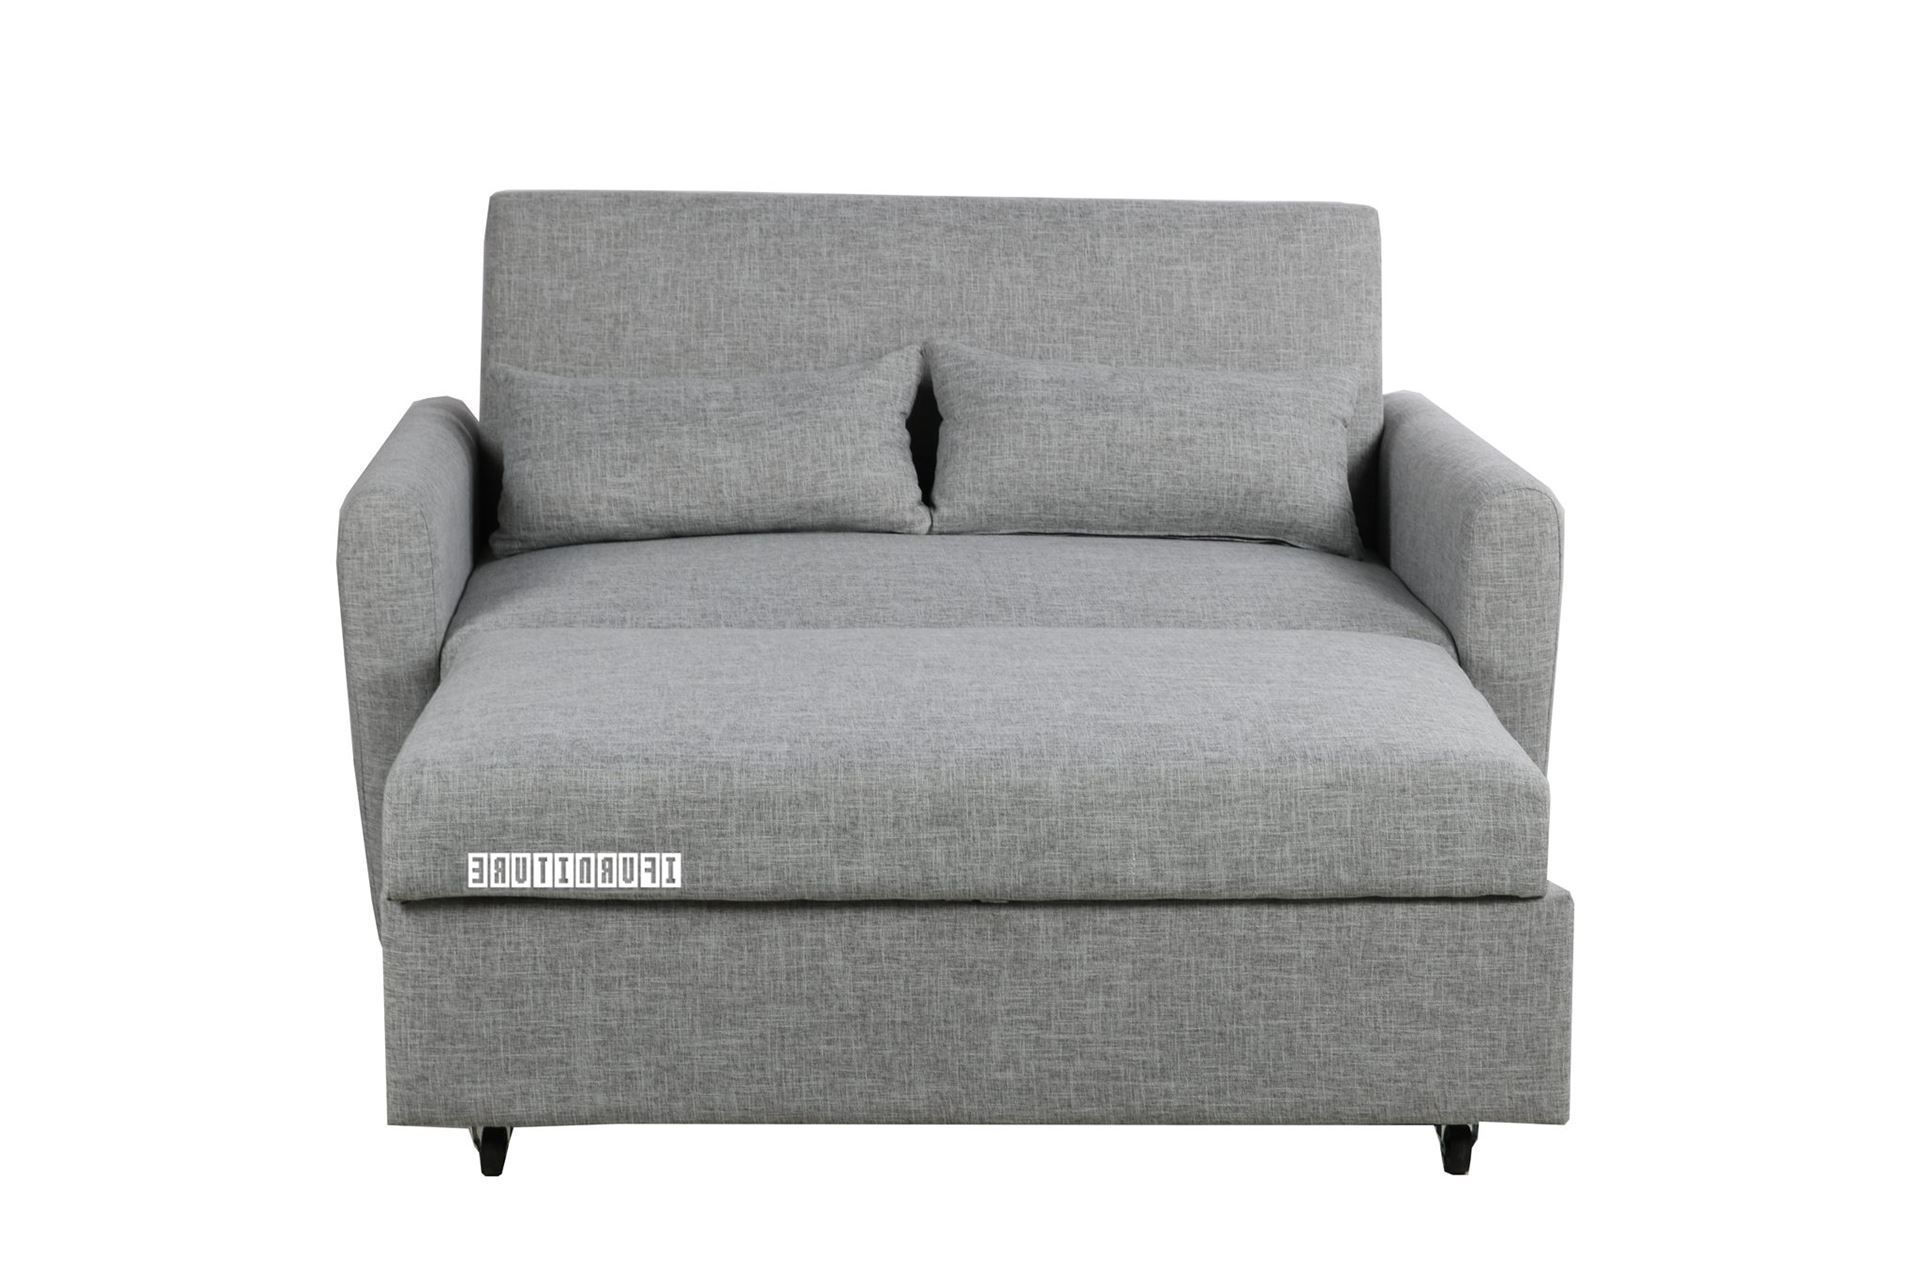 Primo Pull Out 2 Seater Sofa Bed (grey) Intended For 2018 2 In 1 Gray Pull Out Sofa Beds (View 4 of 15)